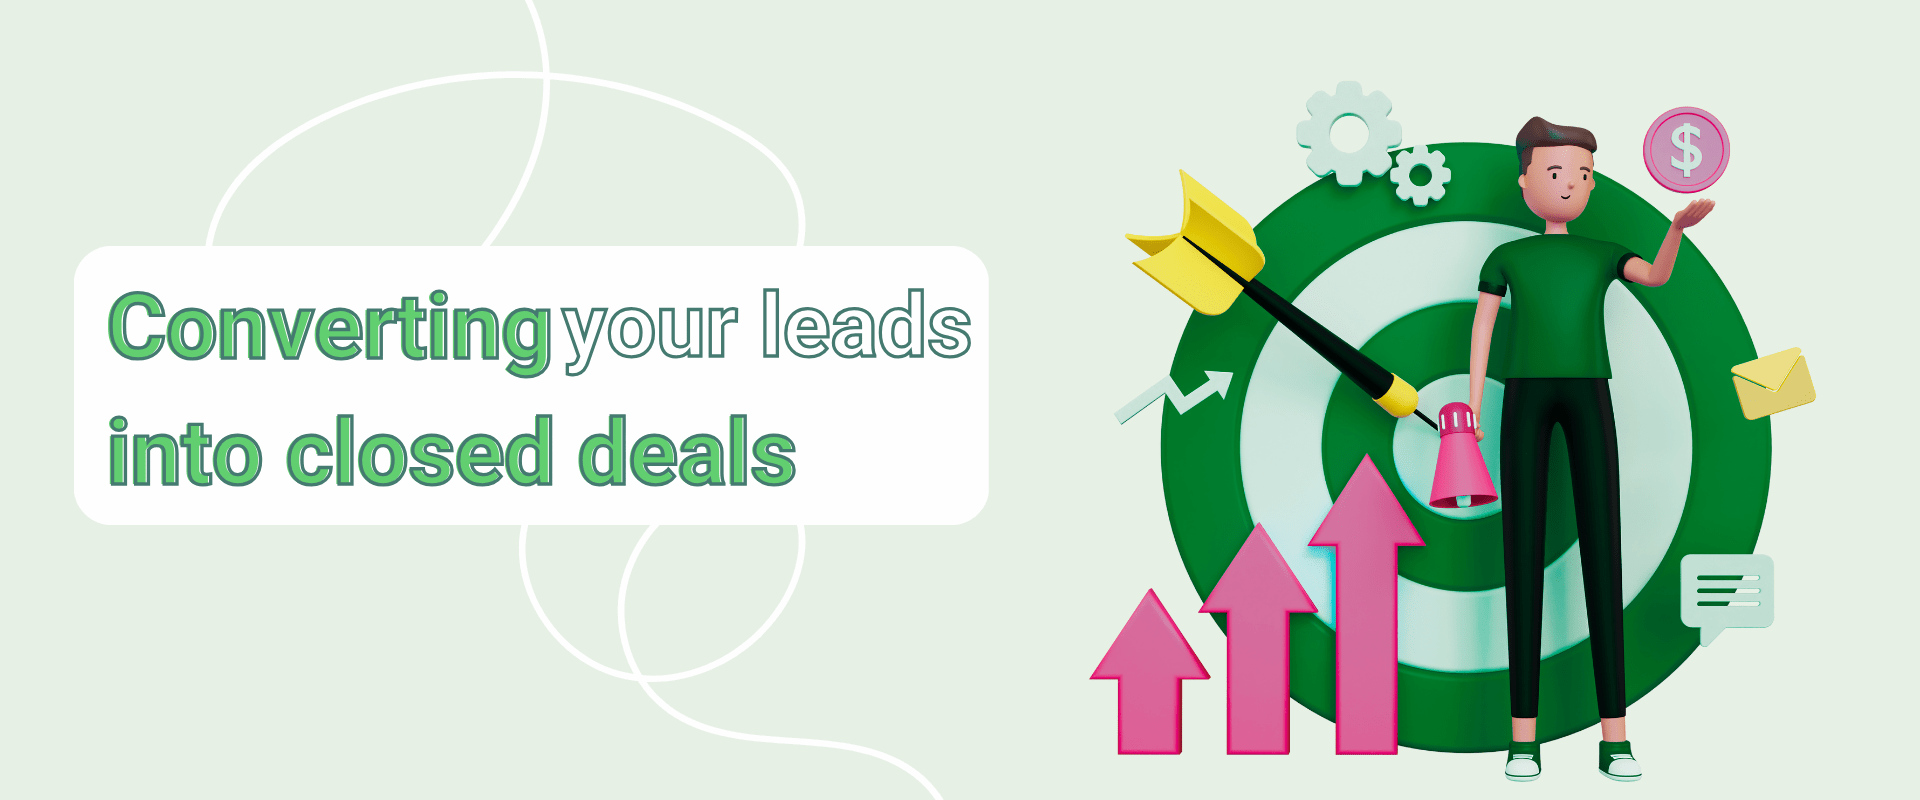 Converting your leads into closed deals